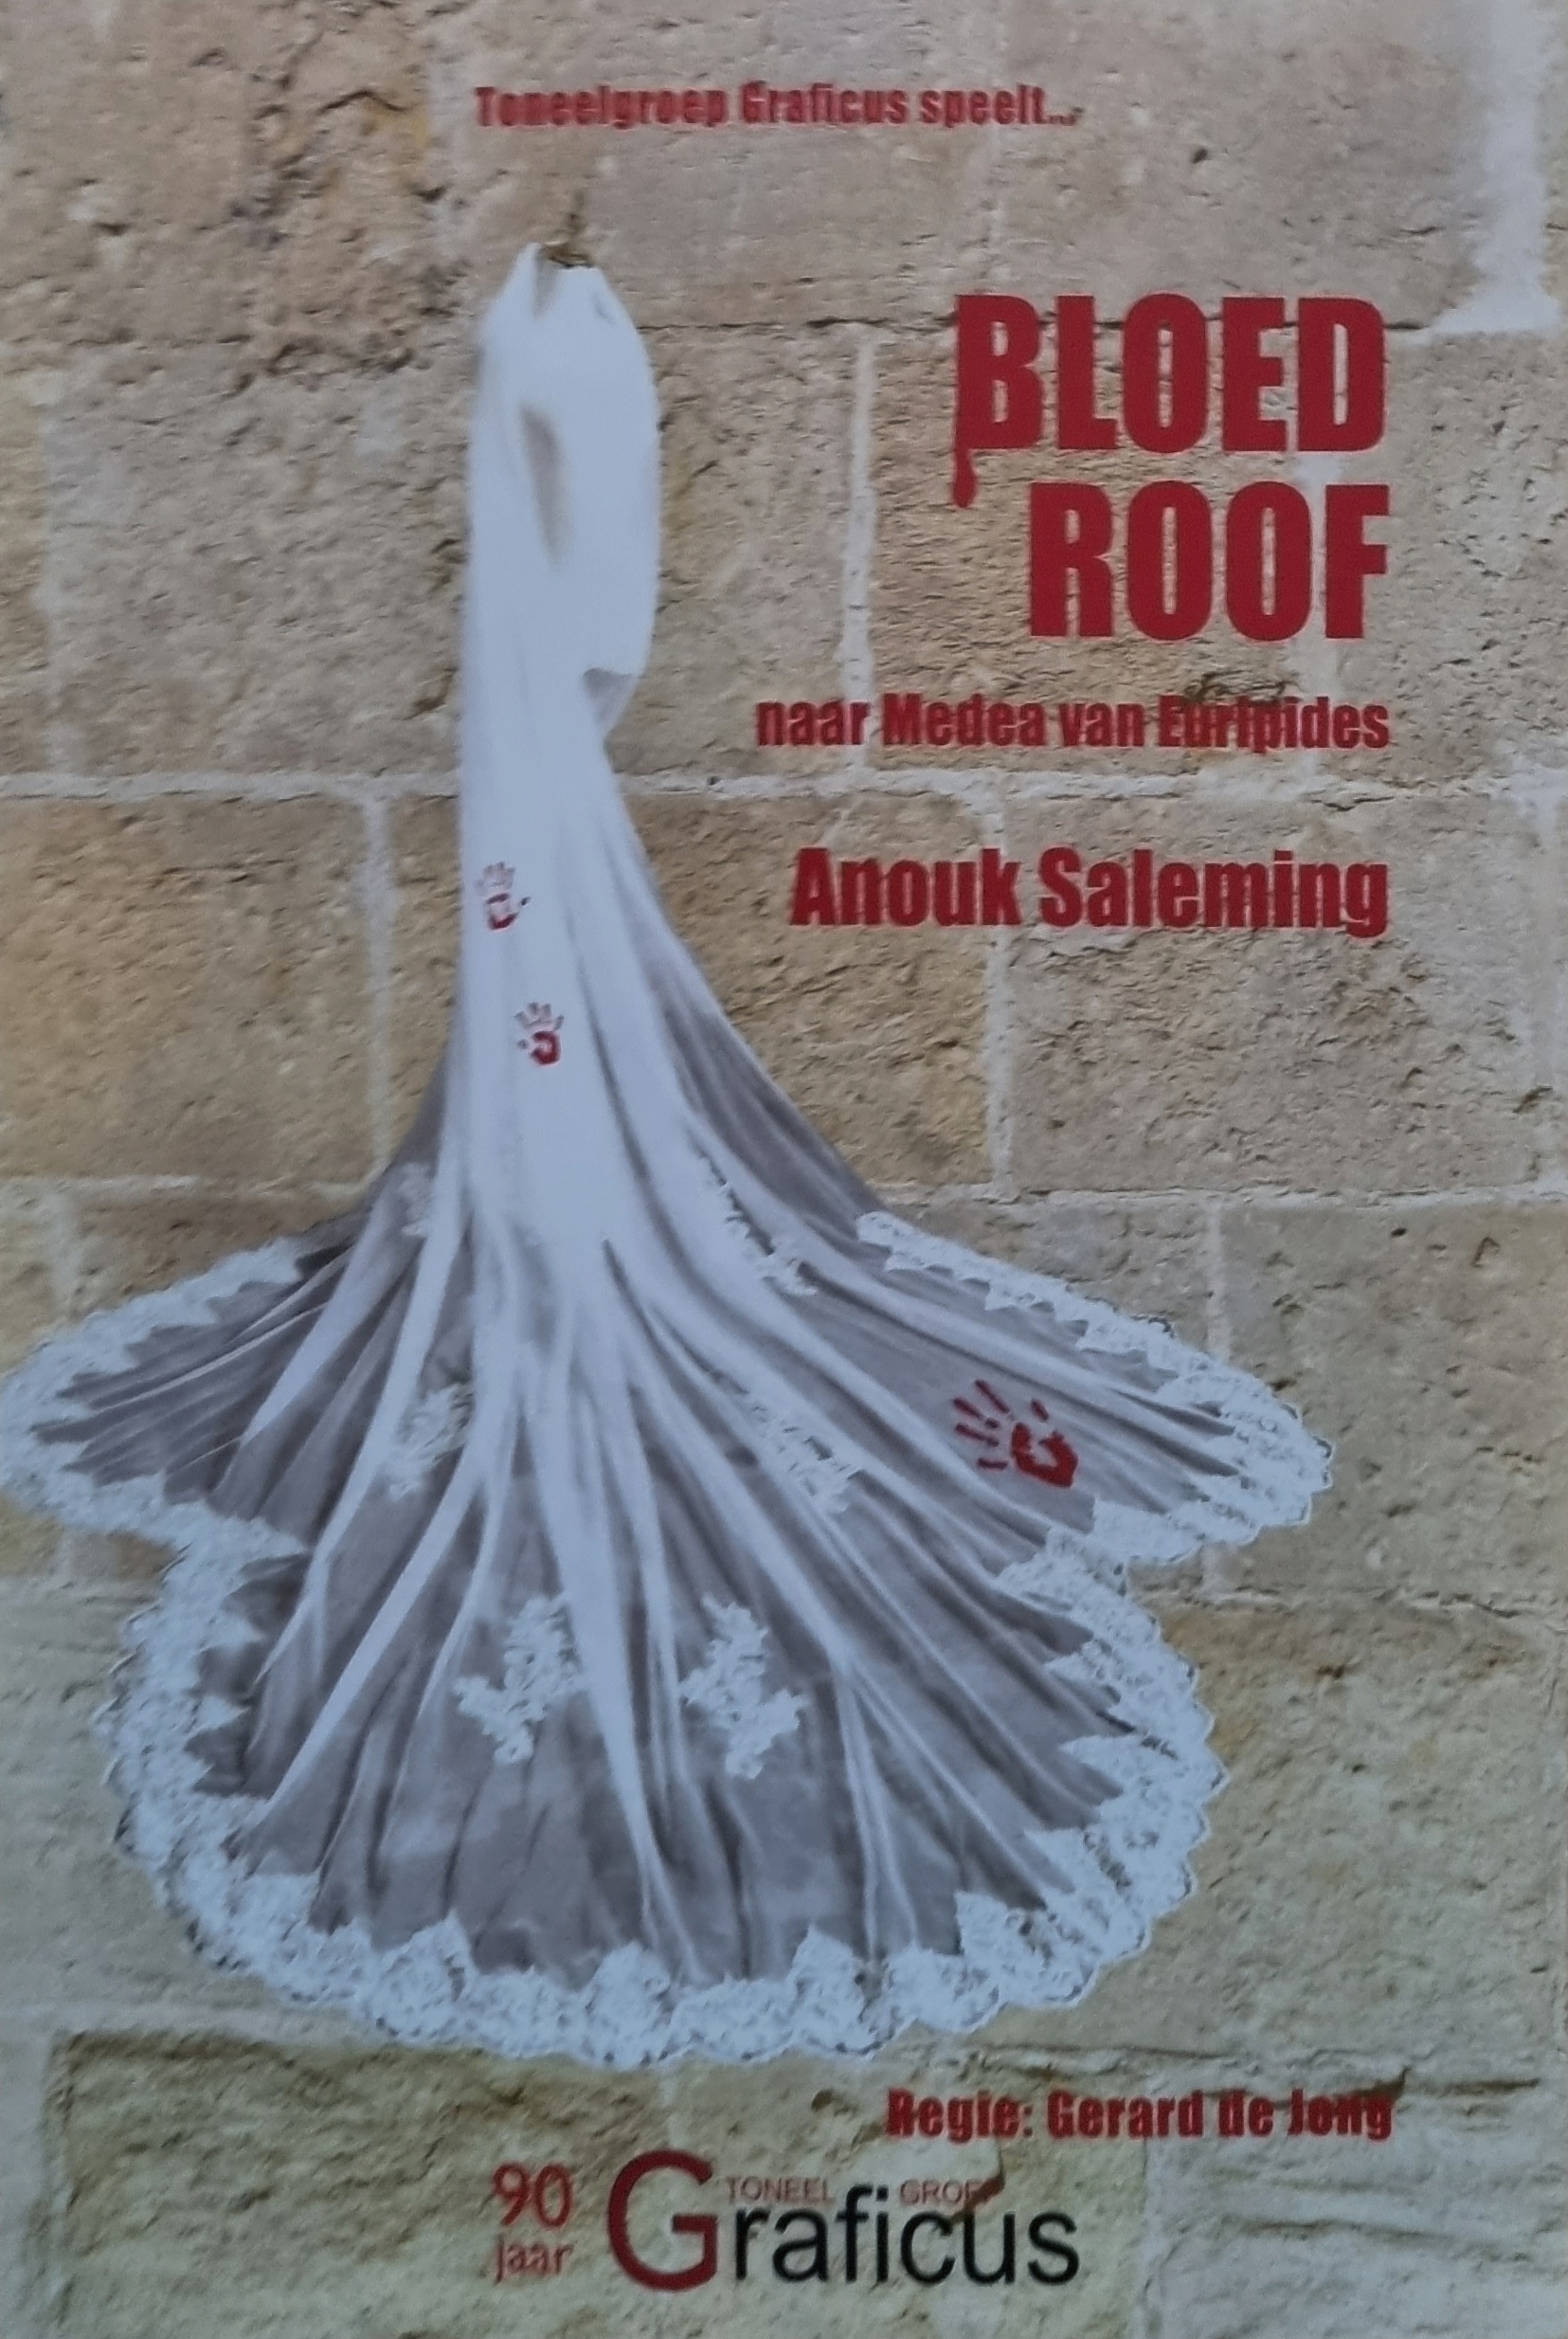 Affiche Bloedroof